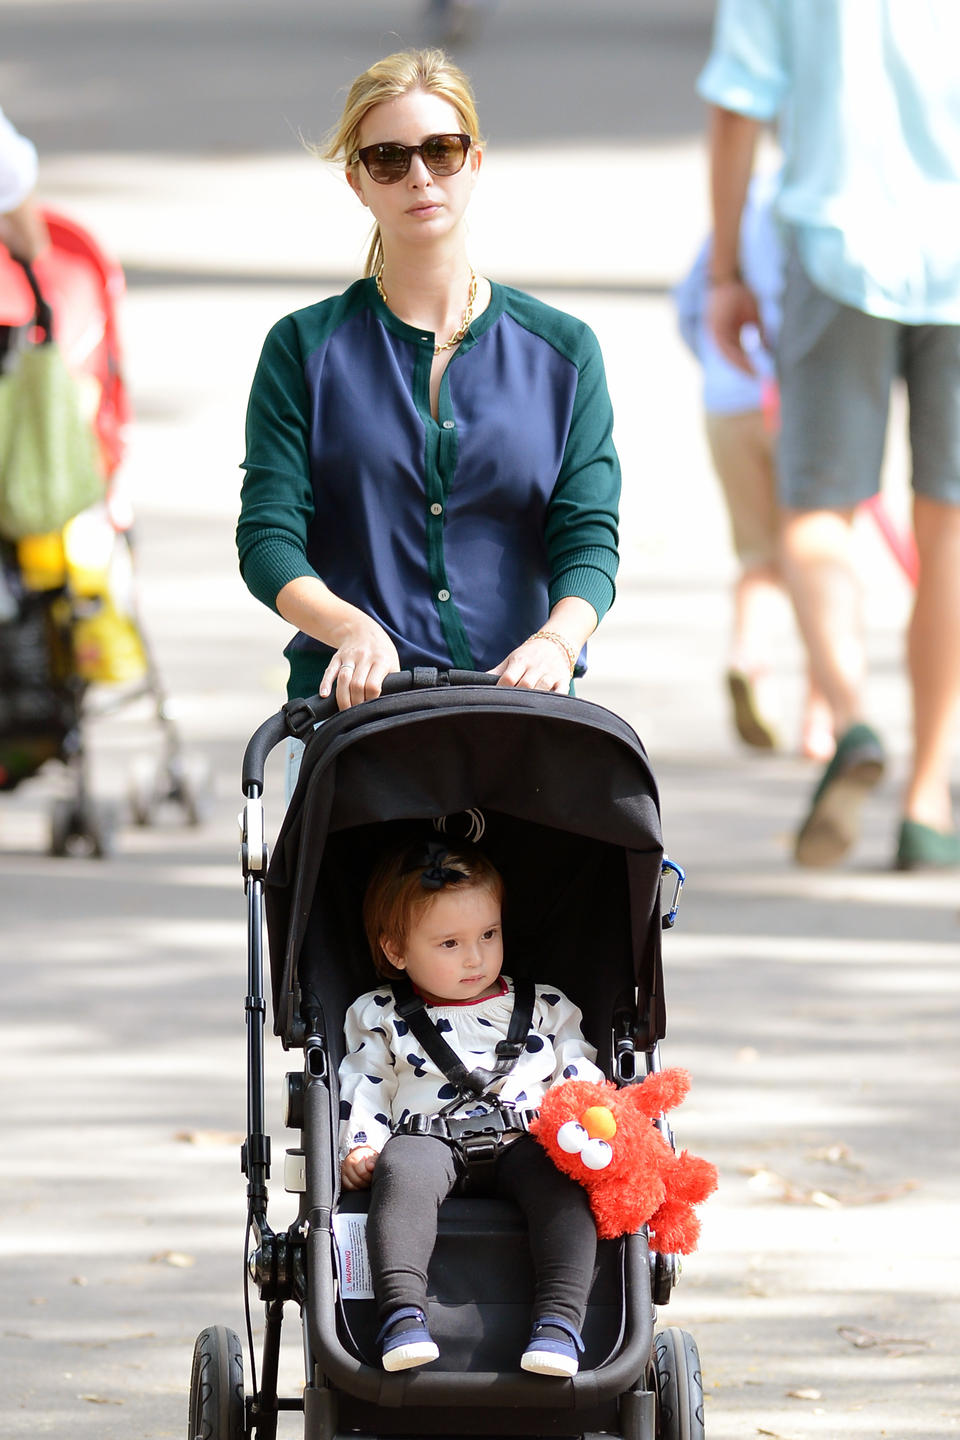 EXCLUSIVE TO INF. ALL-ROUNDER. October 6, 2012: Ivanka Trump with her daughter Arabella Rose Kushner strolling in Central Park in New York City. Mandatory Credit: Elder Ordonez/INFphoto.com Ref.: infusny-160|sp|EXCLUSIVE TO INF. ALL-ROUNDER.